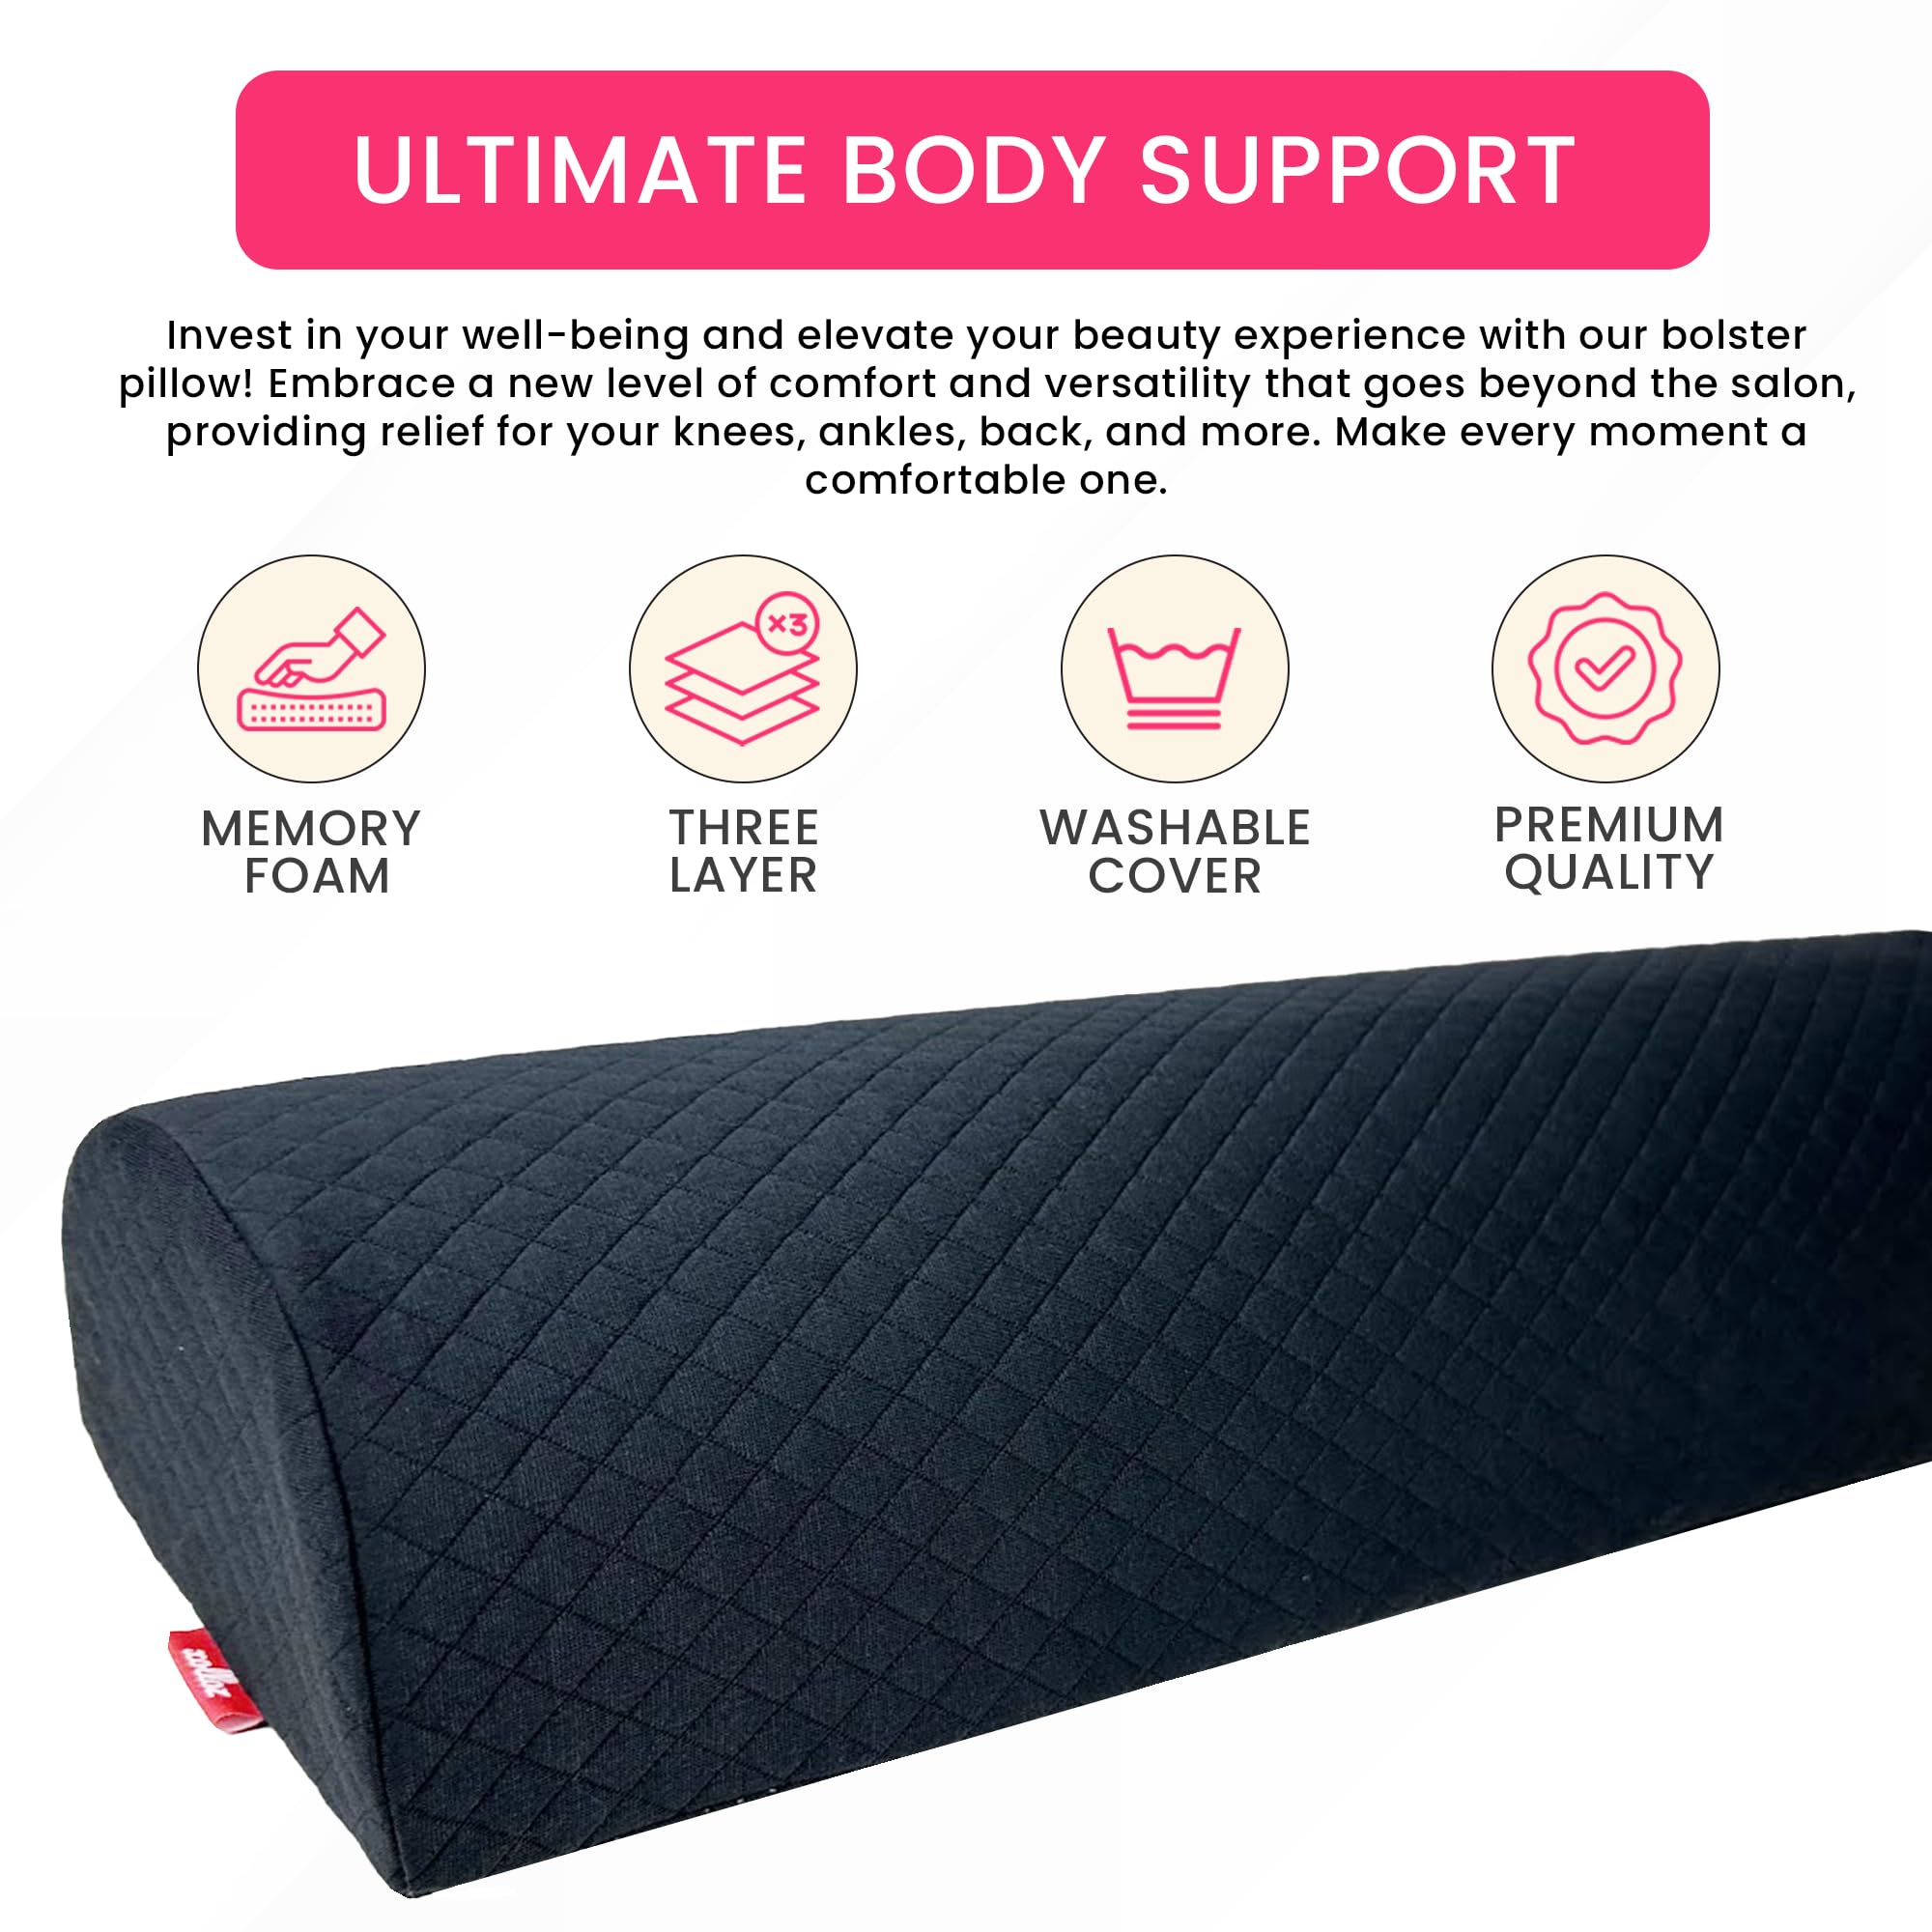 XOLLOZ | Head Pillow + Leg Pillow + Lash Bed Cover | Curved Memory Foam Lash Bed Pillow with Neck and Back Support | Bolster Pillow for Leg and Knee Support | Spa Bed Cover for Lash Extension Bed